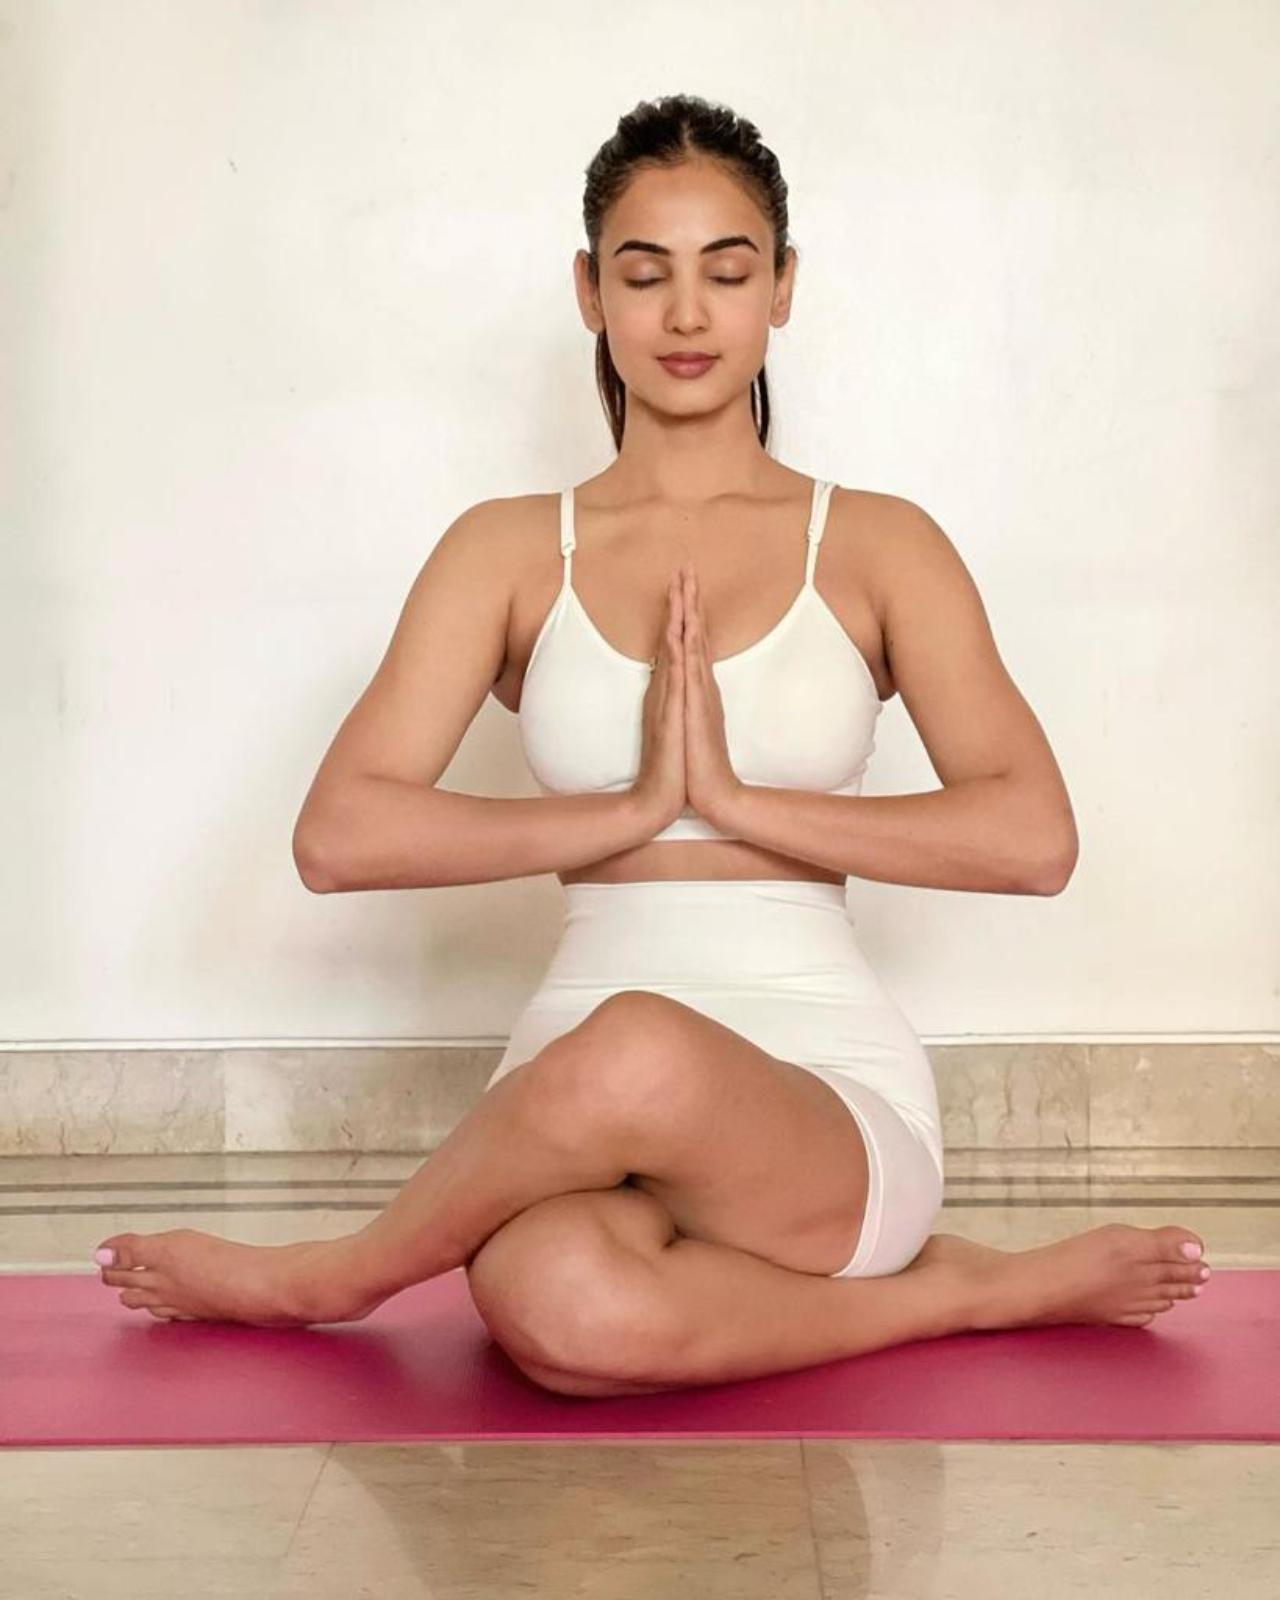 Sonal looks jaw-dropping beautiful in her white co-ord set of a sports bra and short tights. The actress's yoga moves surely have us inspired and so does her wardrobe!